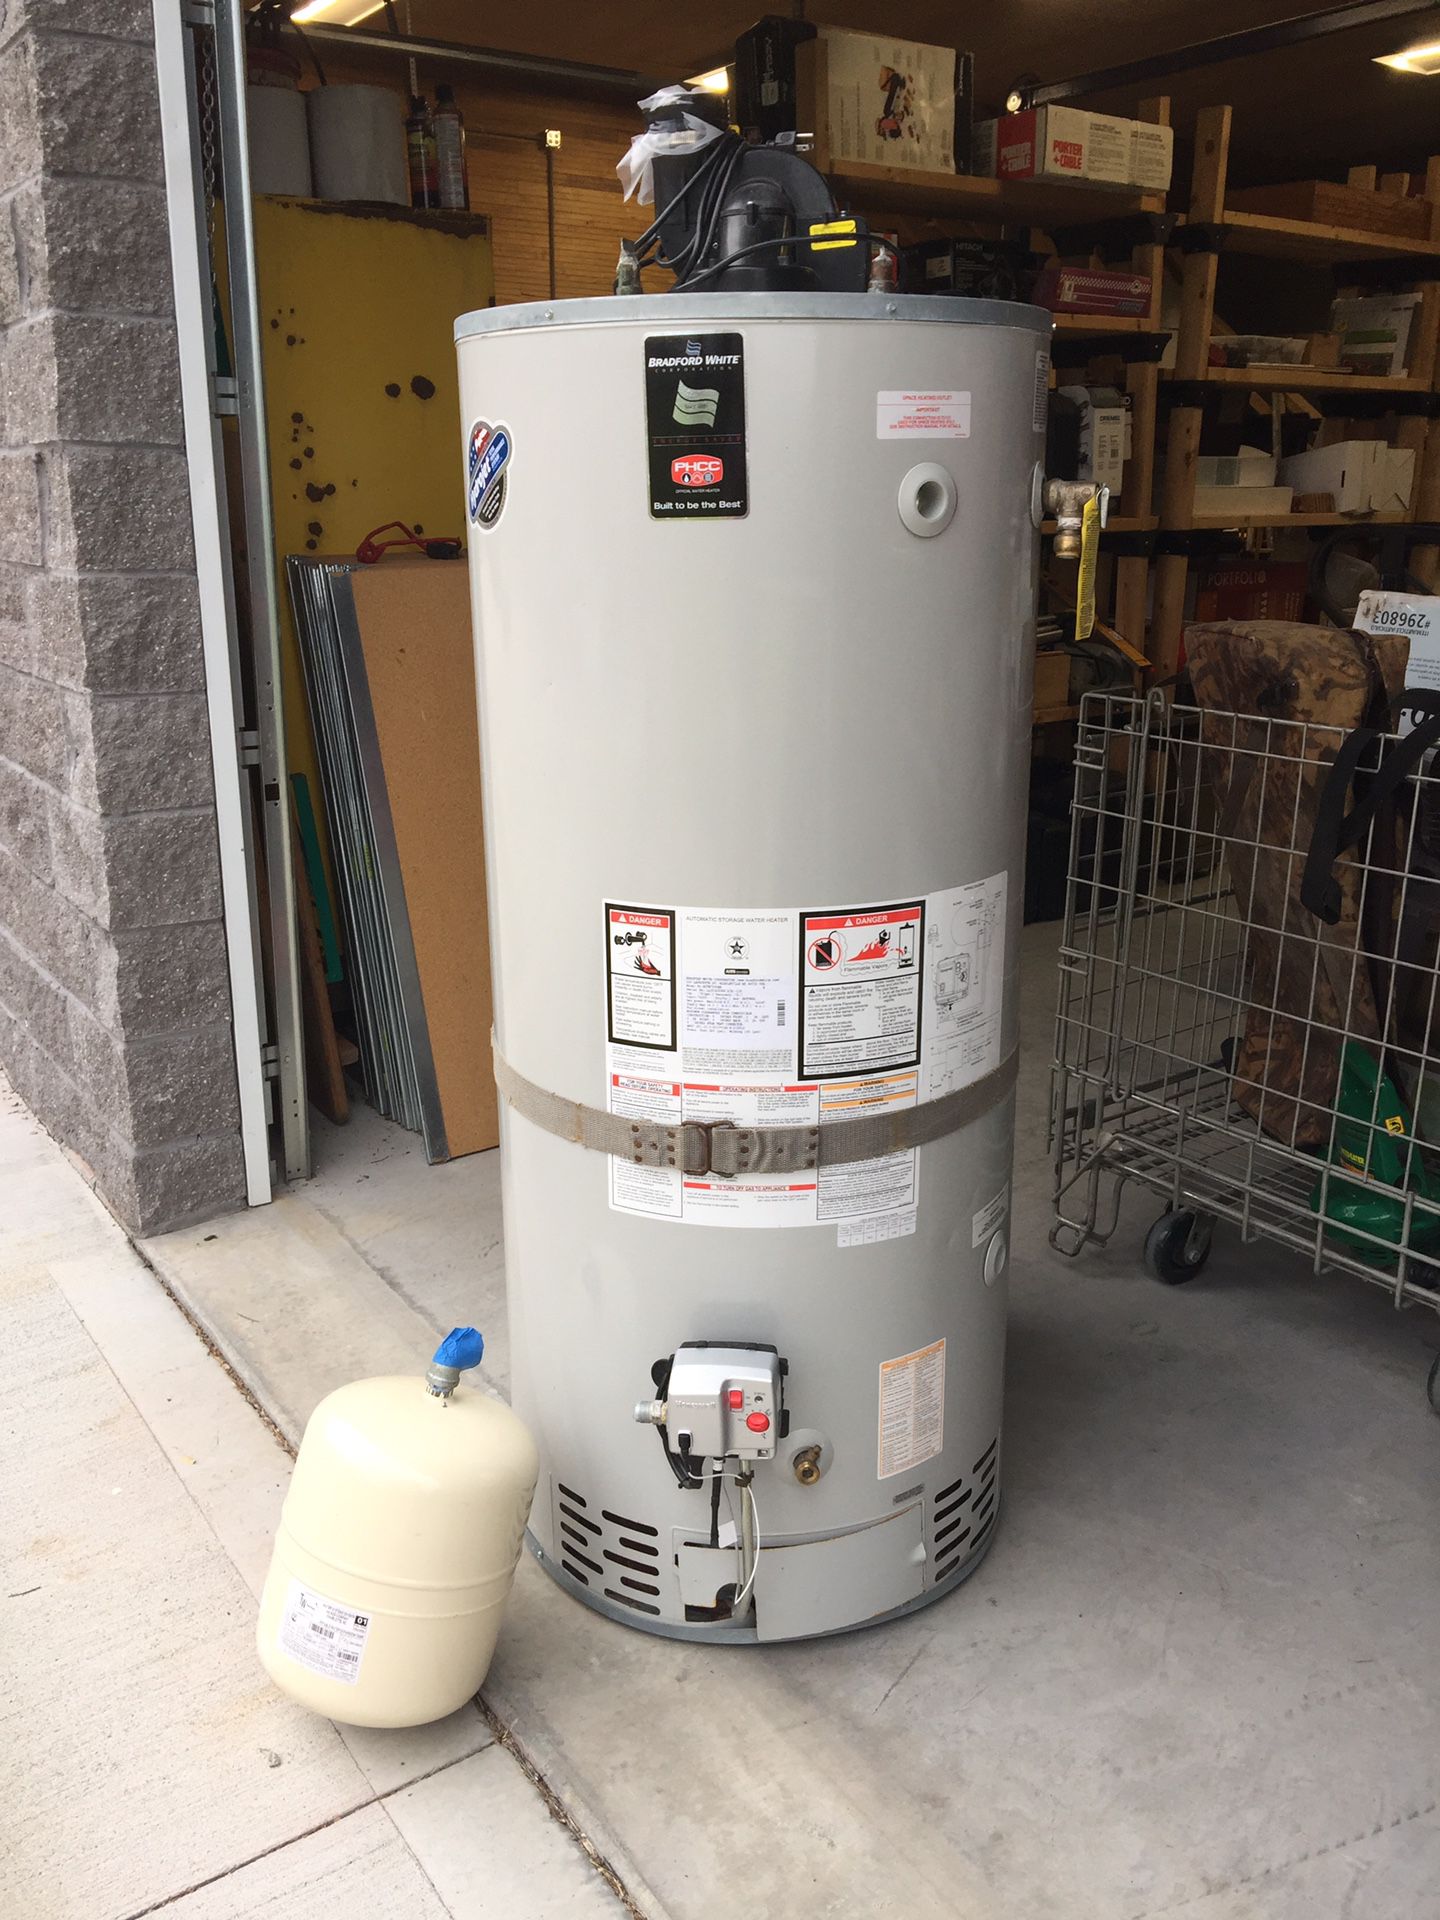 Bradford-White 75 Gallon Natural Gas Water Heater with power vent and expansion tank